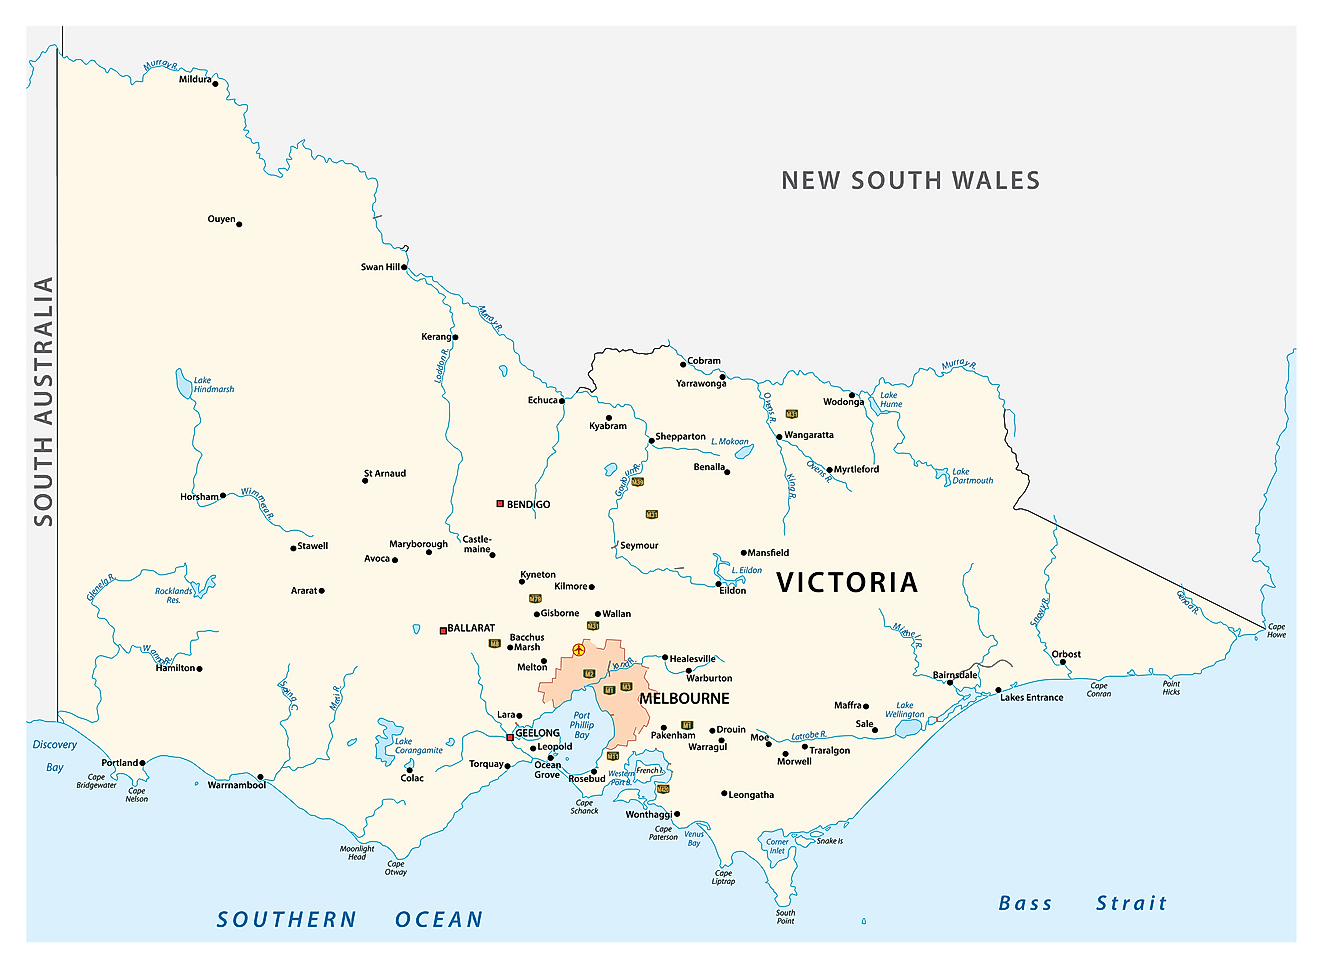 Administrative Map of Victoria showing its cities/towns and its capital city - Melbourne